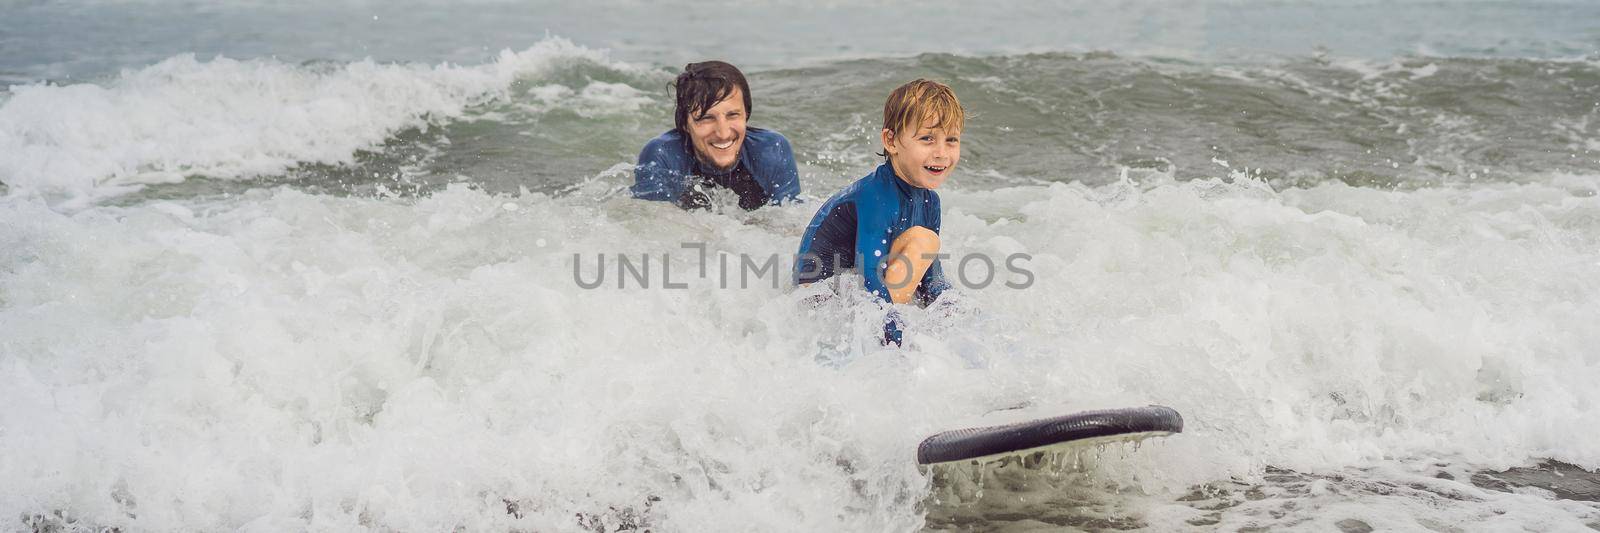 BANNER, LONG FORMAT Father or instructor teaching his 5 year old son how to surf in the sea on vacation or holiday. Travel and sports with children concept. Surfing lesson for kids.